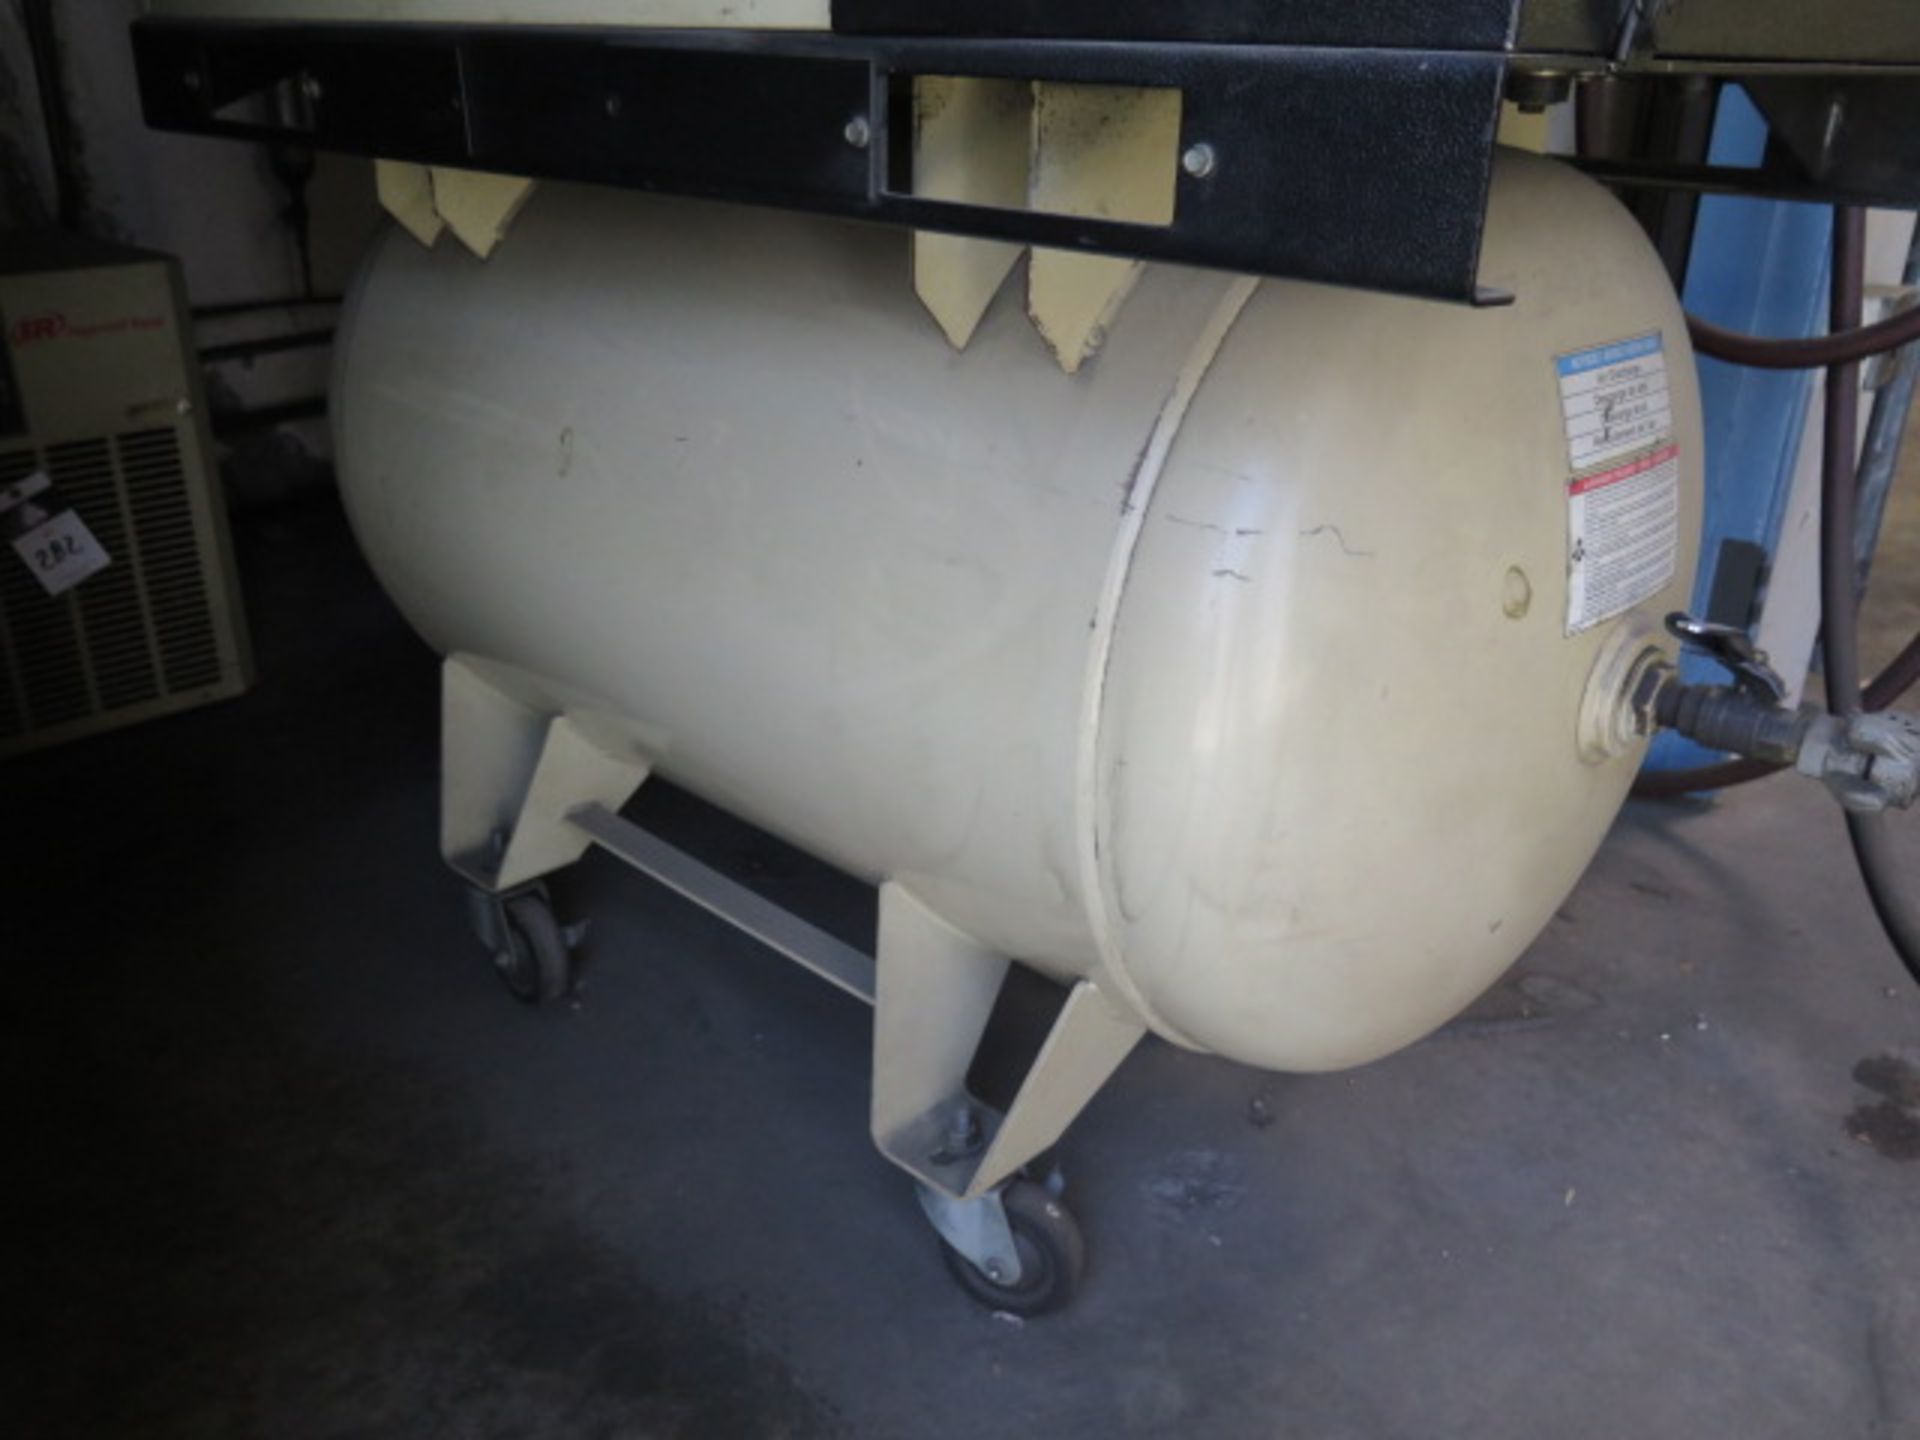 Ingersoll Rand mdl. UNI-7-115-L 7Hp Rotary Air Compressor s/n UE0771U06053 w/ 80 Gallon, SOLD AS IS - Image 5 of 7